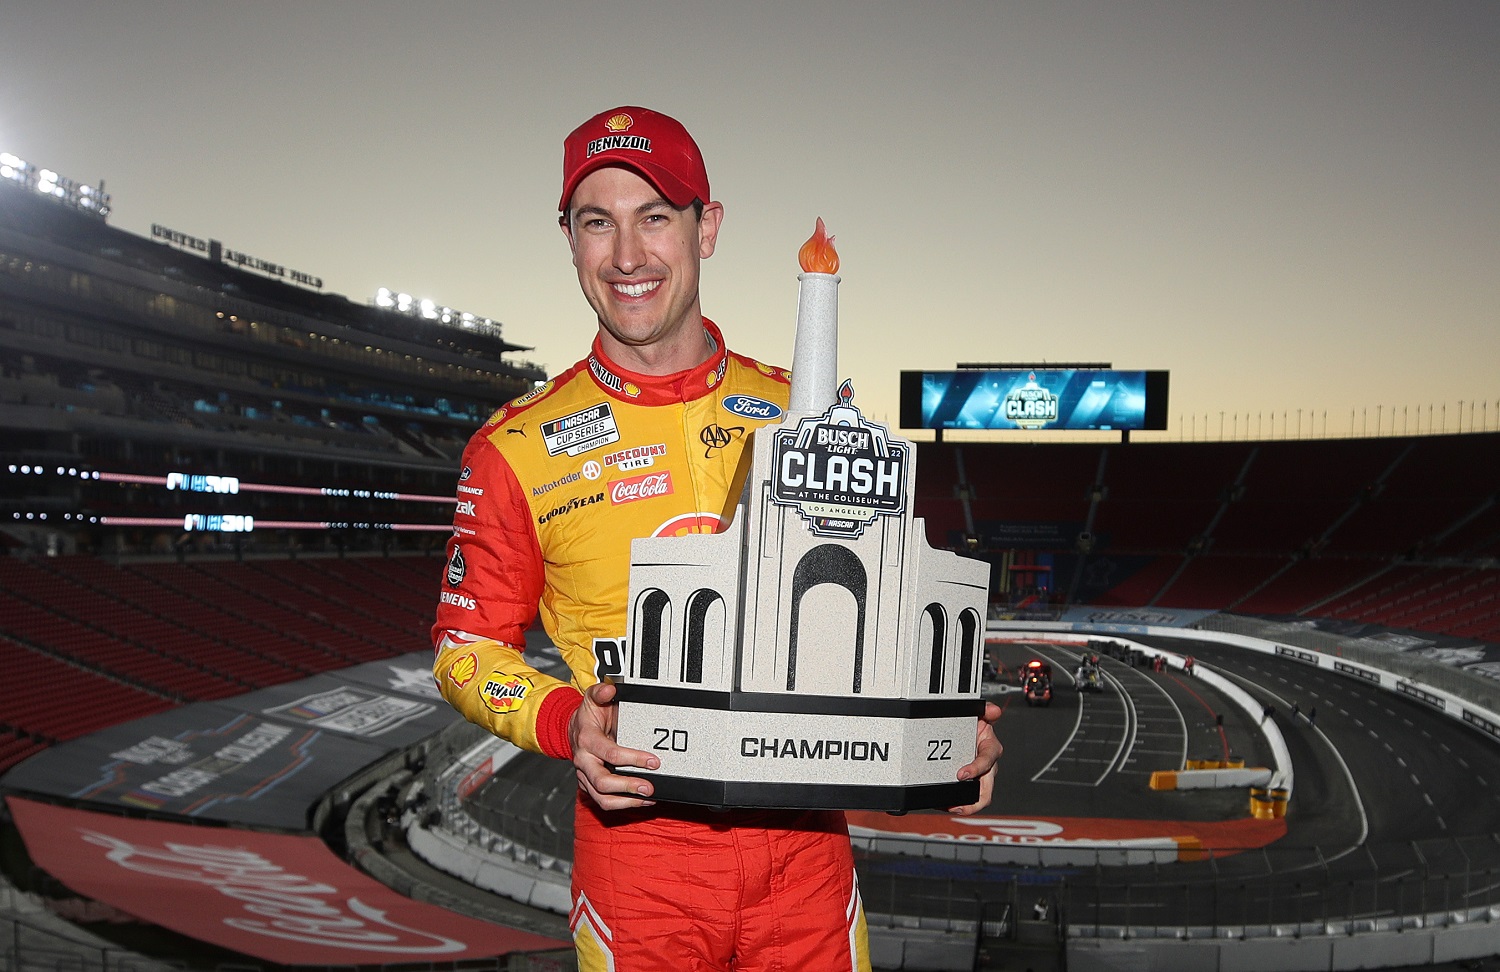 Joey Logano poses with the trophy after winning the NASCAR Cup Series Busch Light Clash at the Los Angeles Memorial Coliseum on Feb. 6, 2022. | Meg Oliphant/Getty Images